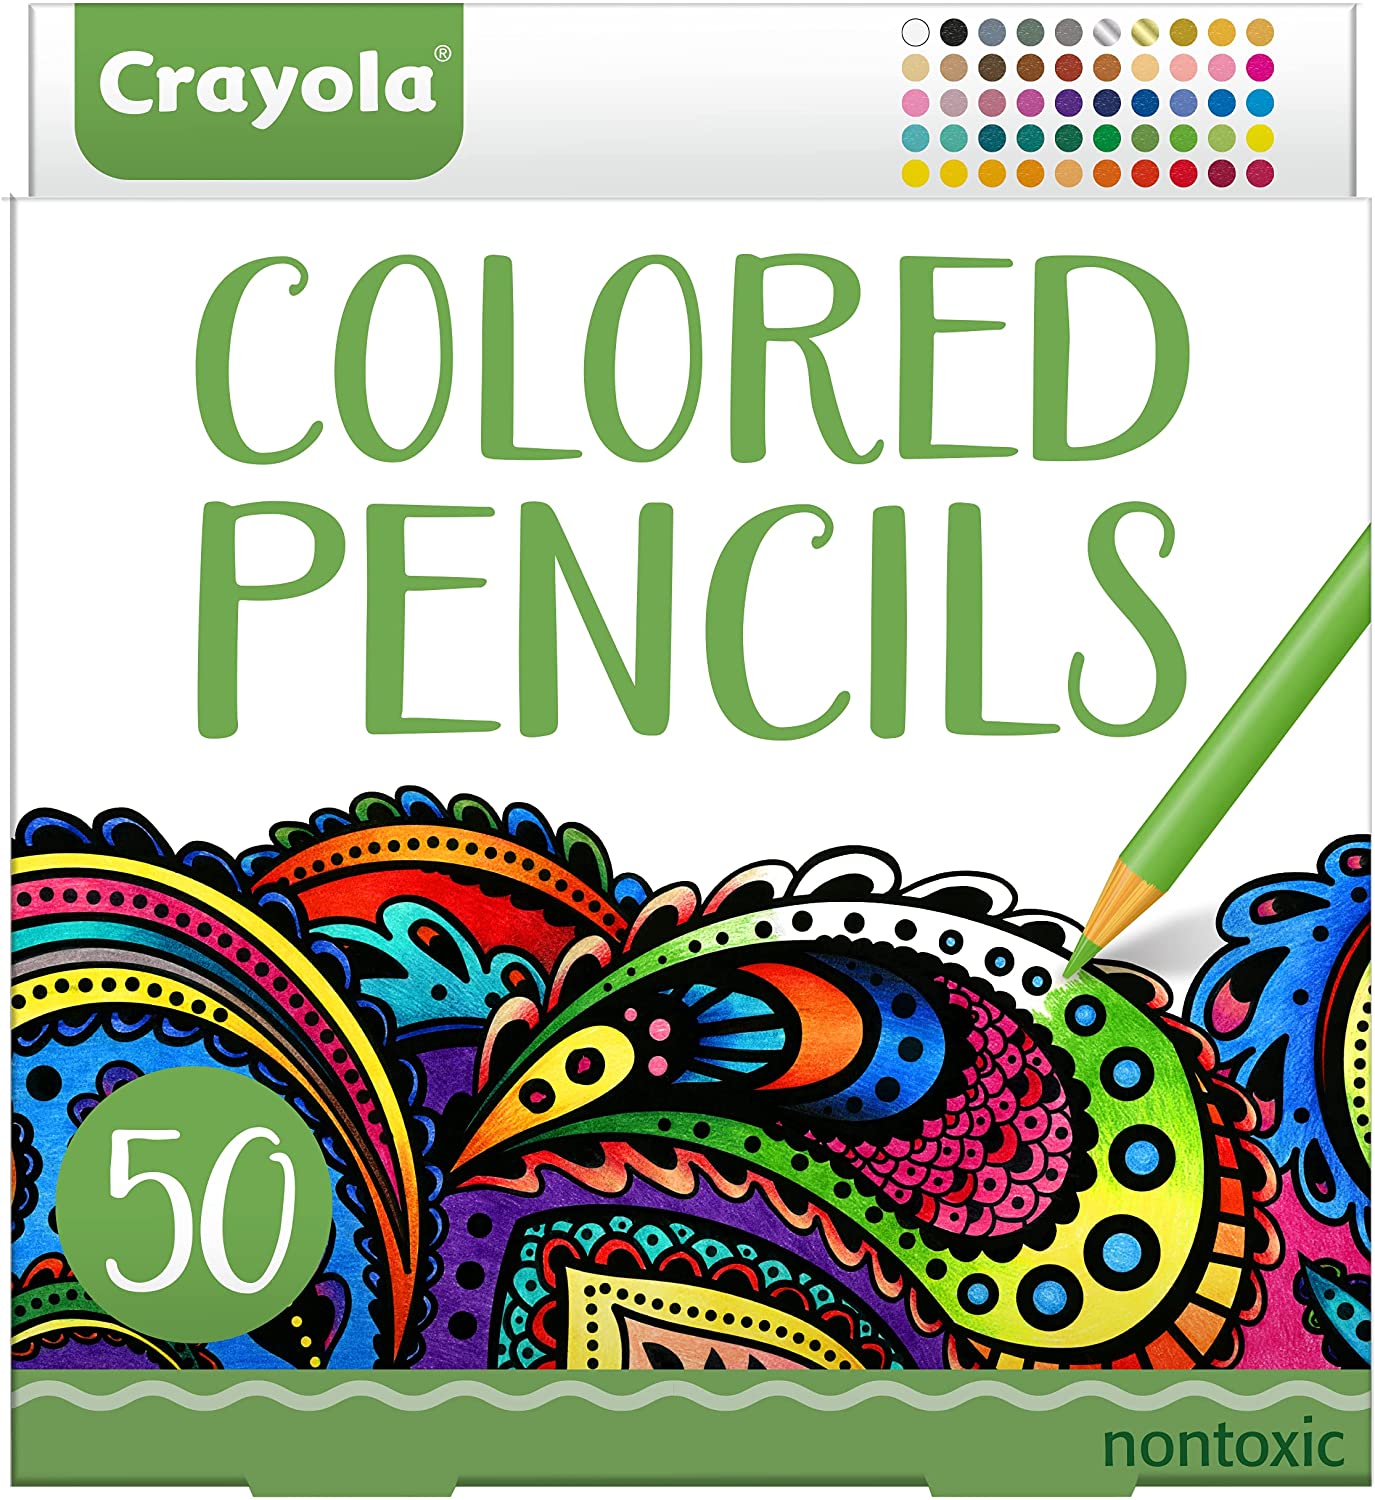 Crayola Colored Pencils, Adult & Kids Coloring, Fun At Home